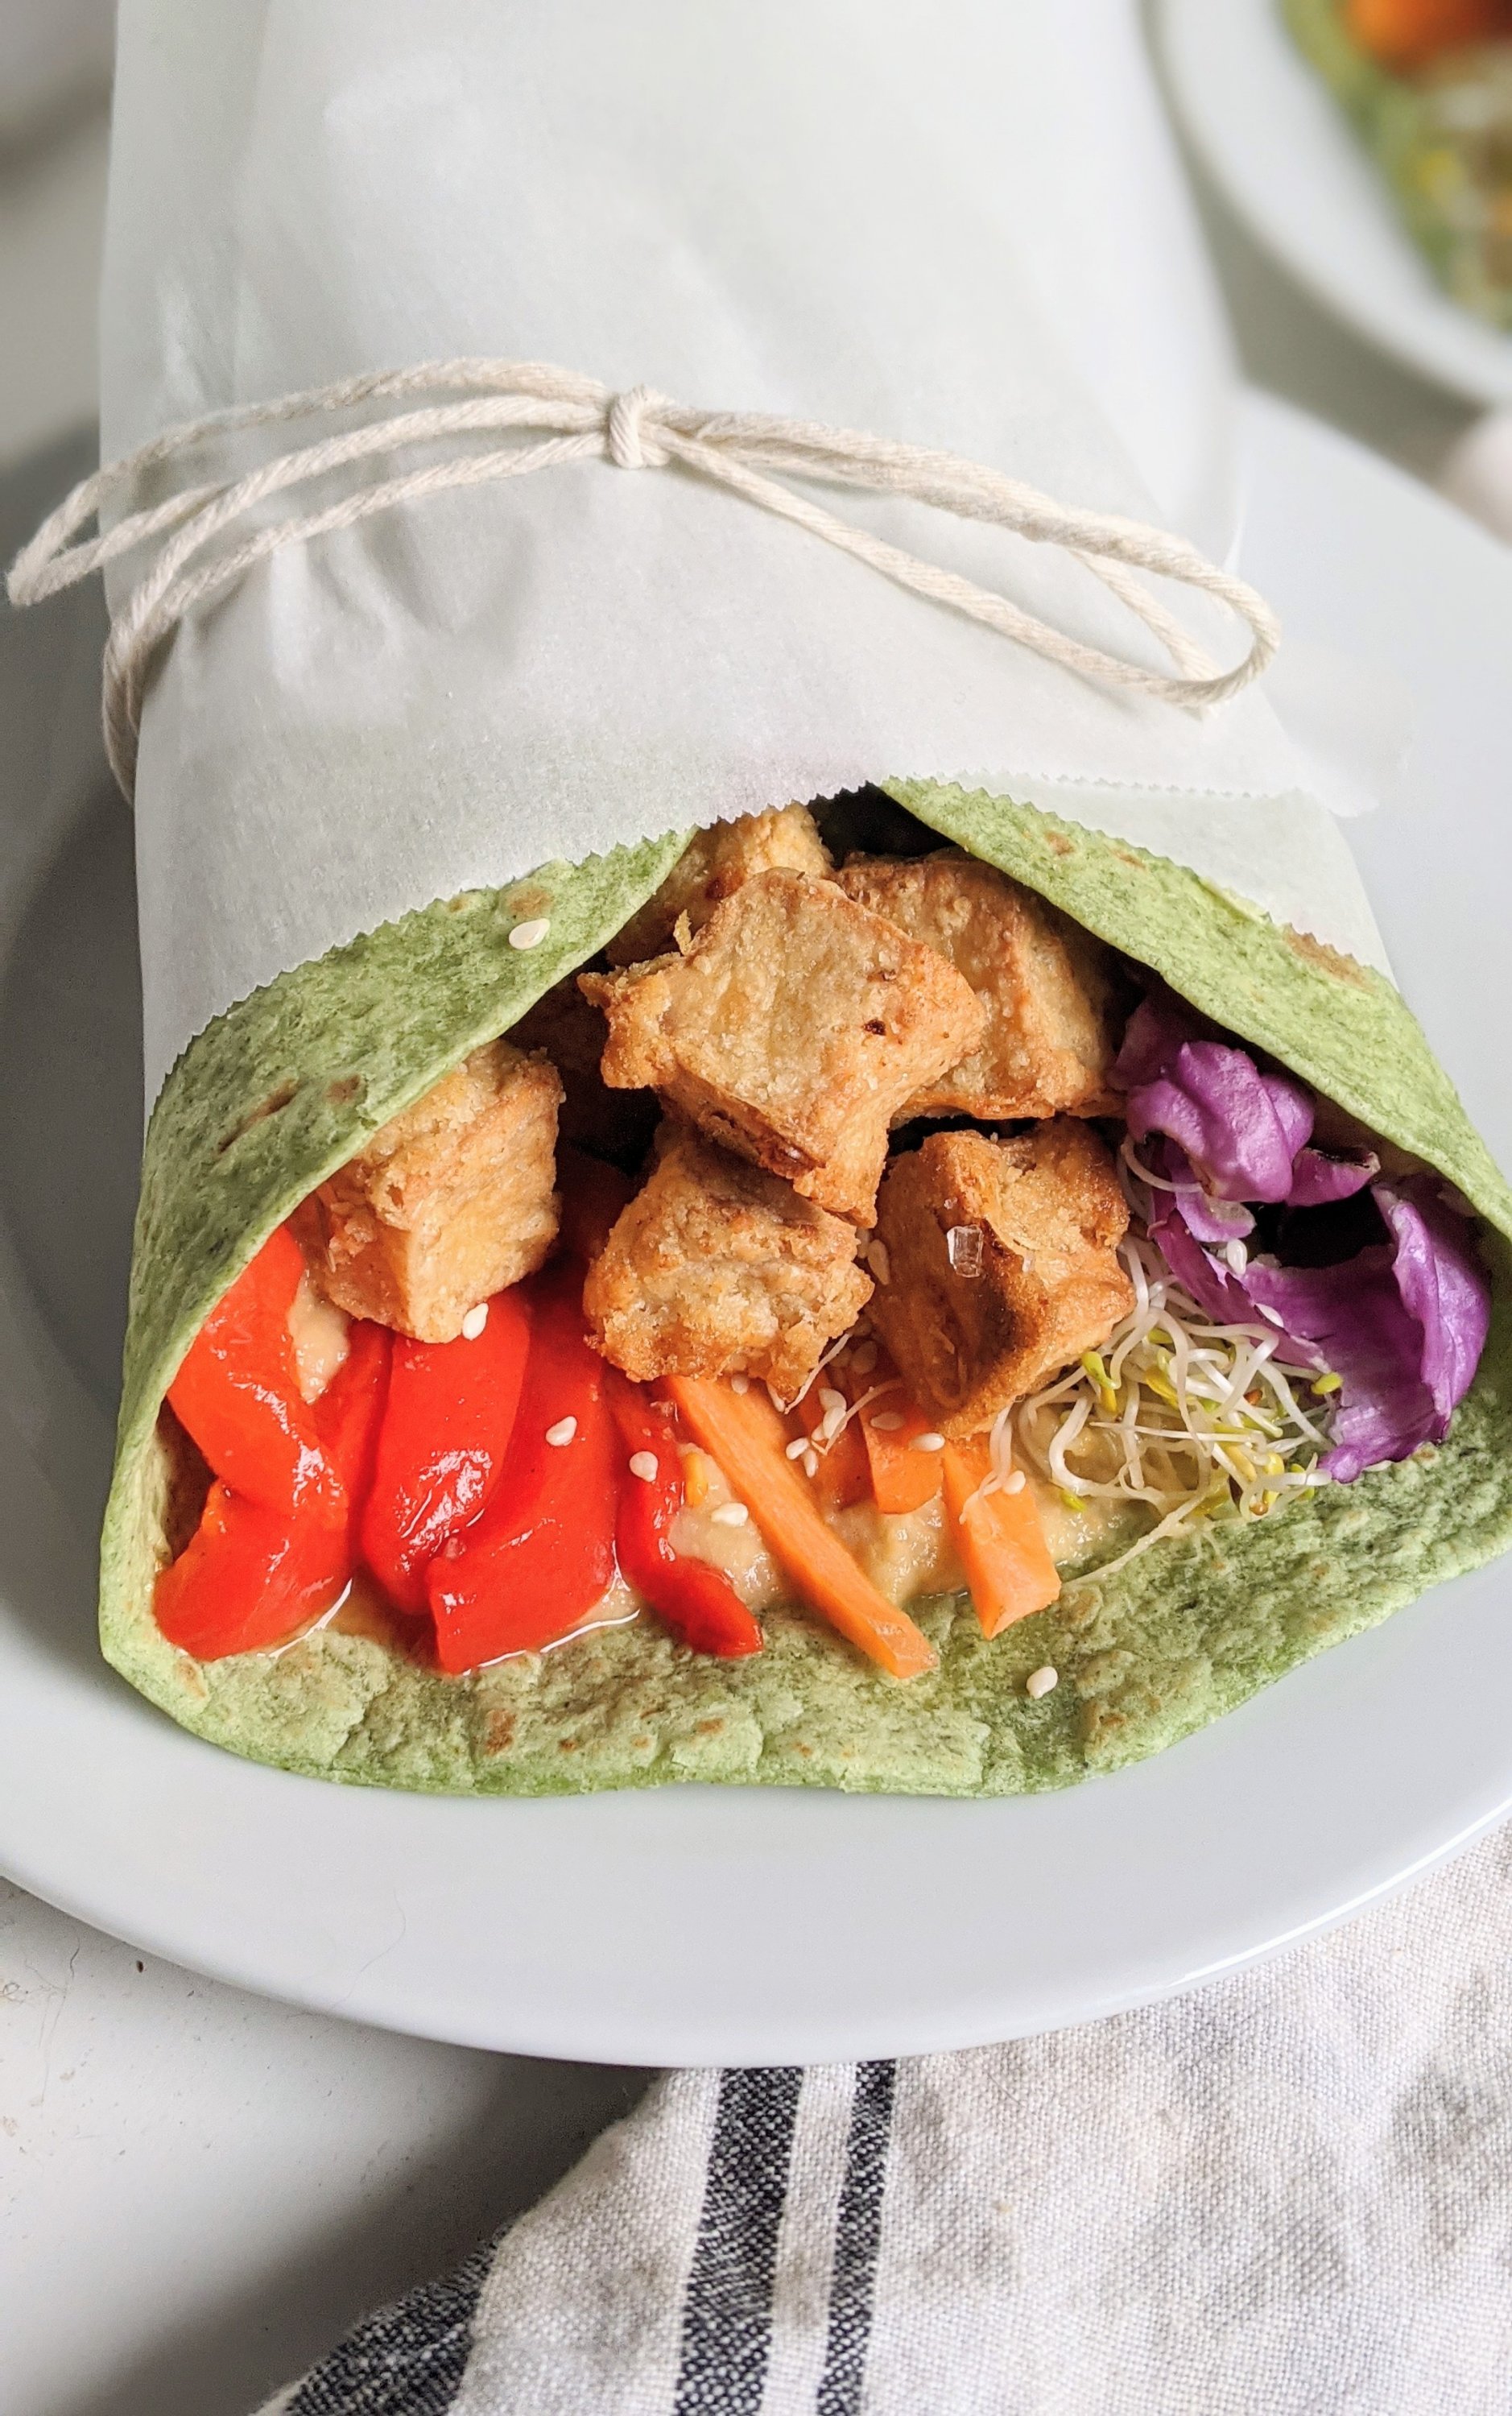 vegan tahini tofu recipe nut free sandwiches healthy vegetarian meatless high protein dinners lunches sandwich wrap healthy slrouts red cabbage roasted red pepper sandwich healthy veganuary